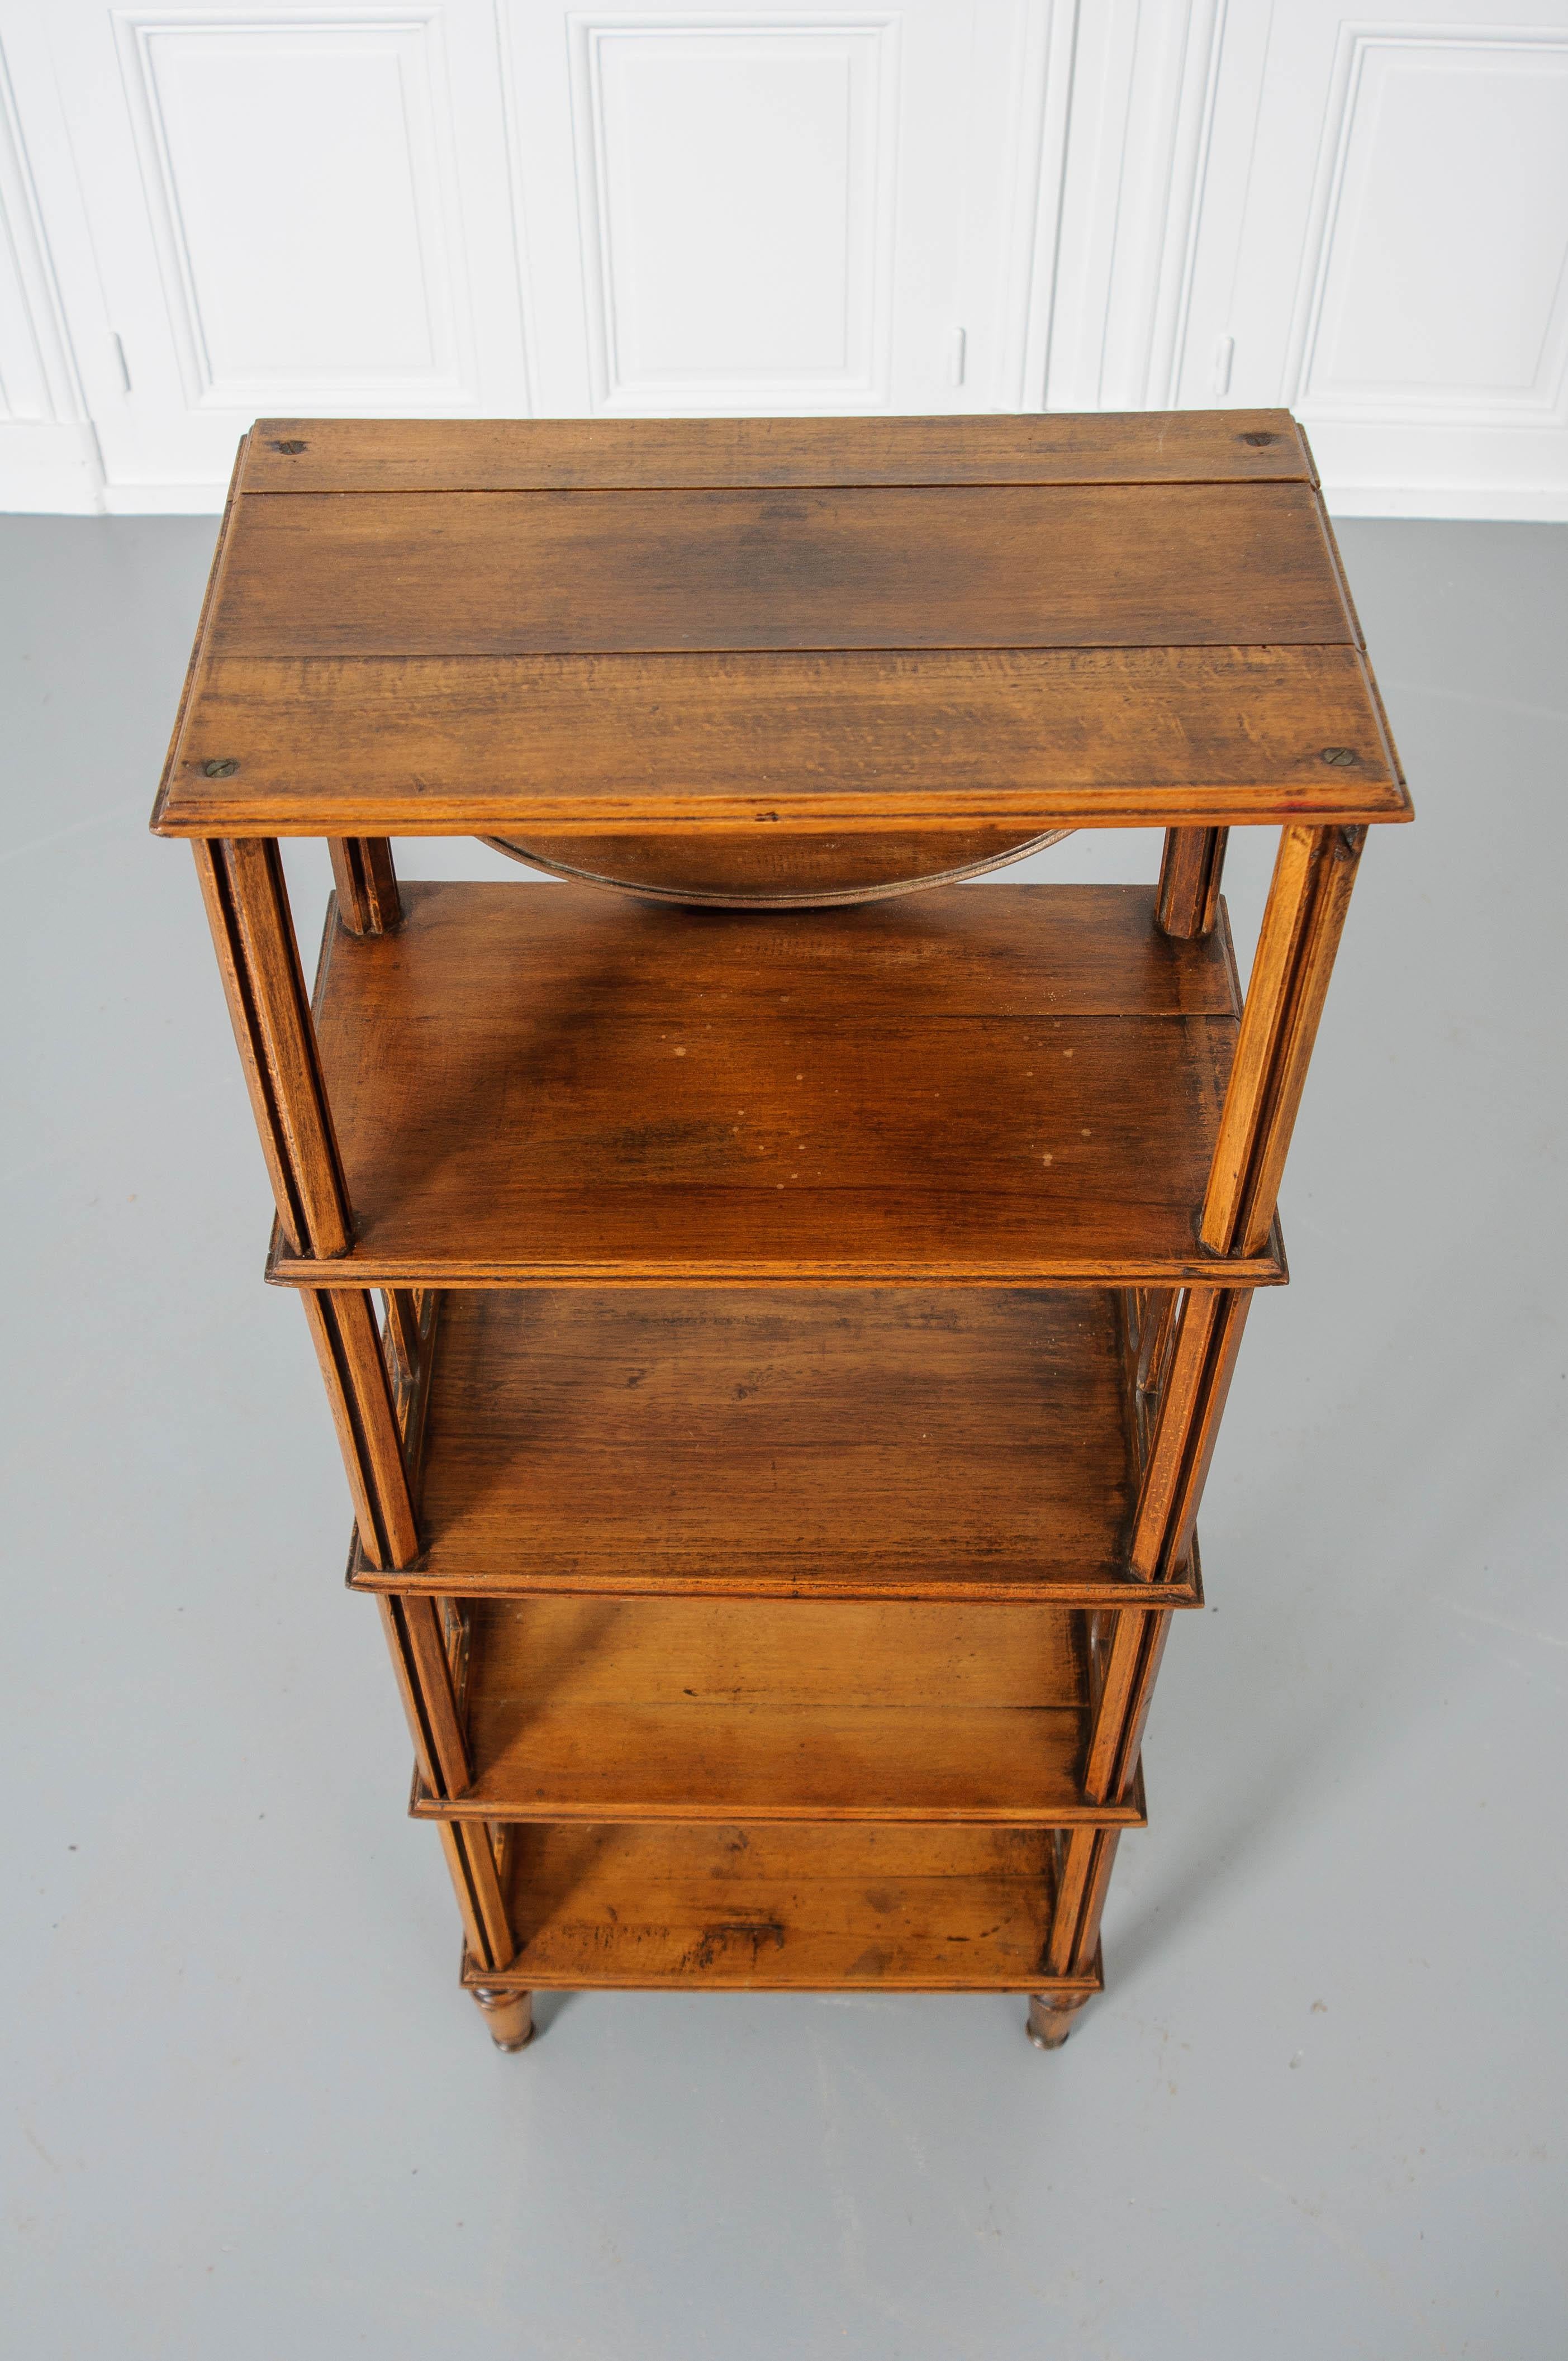 A petite but stylish French 19th century five-tier fruitwood étagère. This piece has five shelves that are spaced by unique supports. The lower three sections have panels with window-like openings on both sides. The top section has an oval mirror.